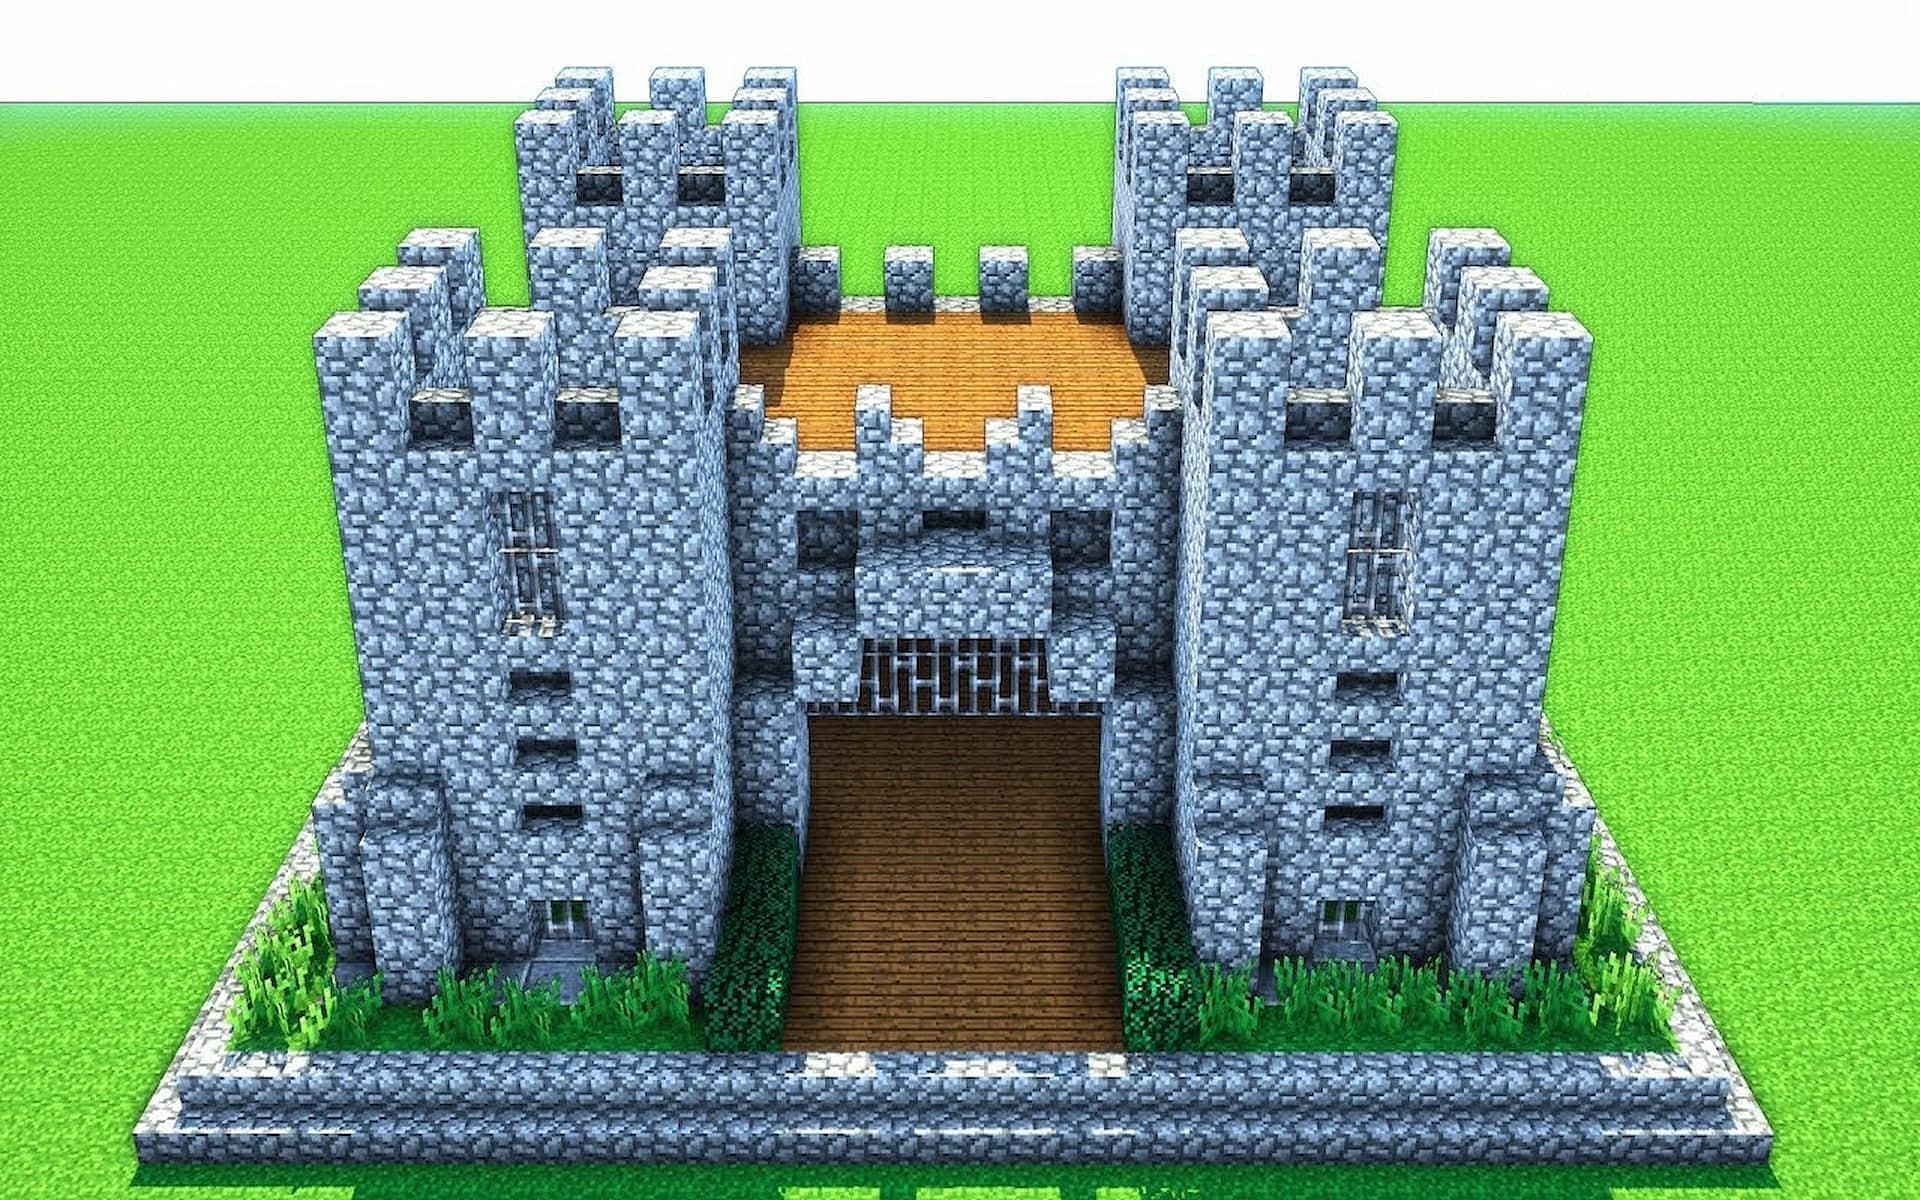 Castles are a fun and challenging build in Minecraft (Image via YouTube/A1MOSTADDICTED MINECRAFT)